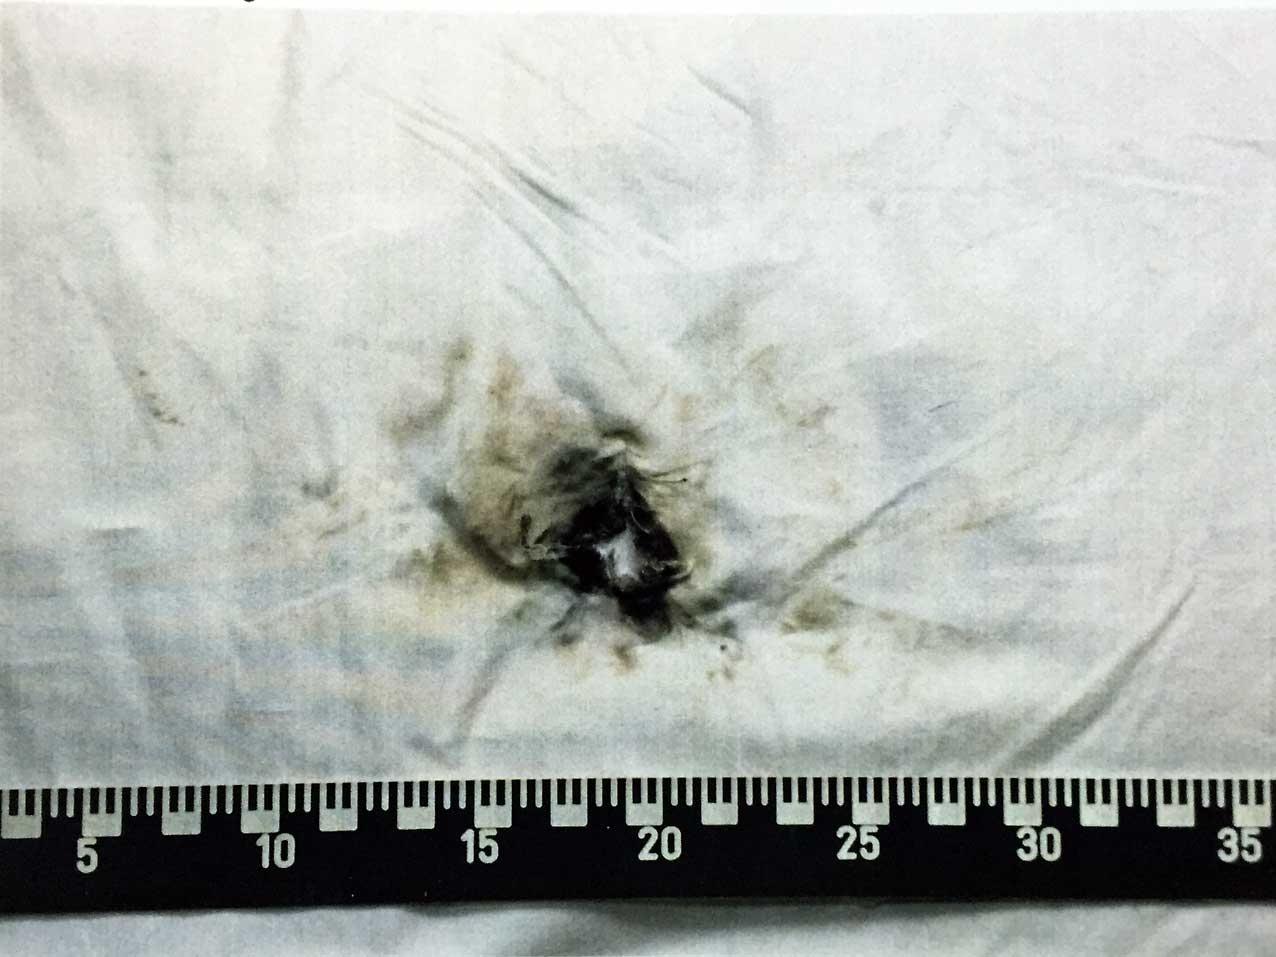 TEST SHOT: Was the pillow used as a silencer? There are clear marks where the first shot went into the pillow. Photo: POLICE.